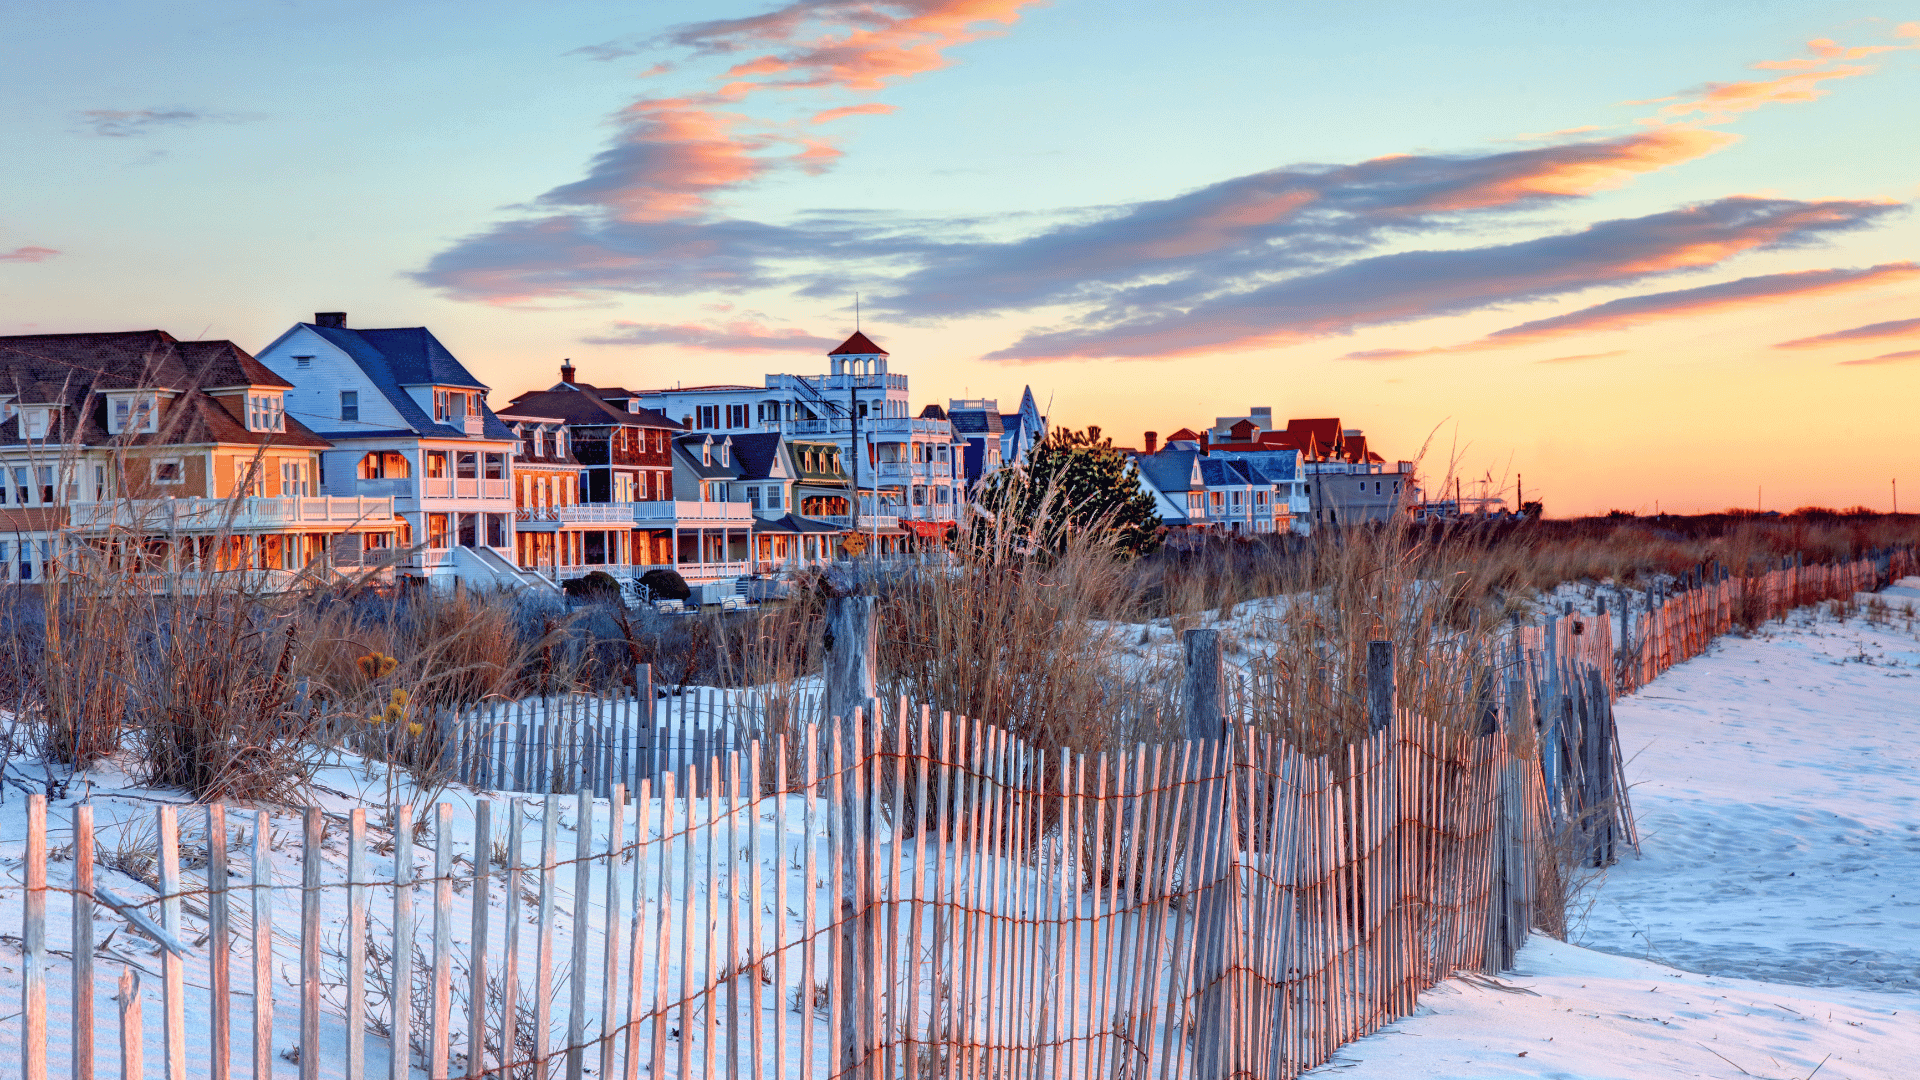 Hosts Global | Cape May charming seaside town